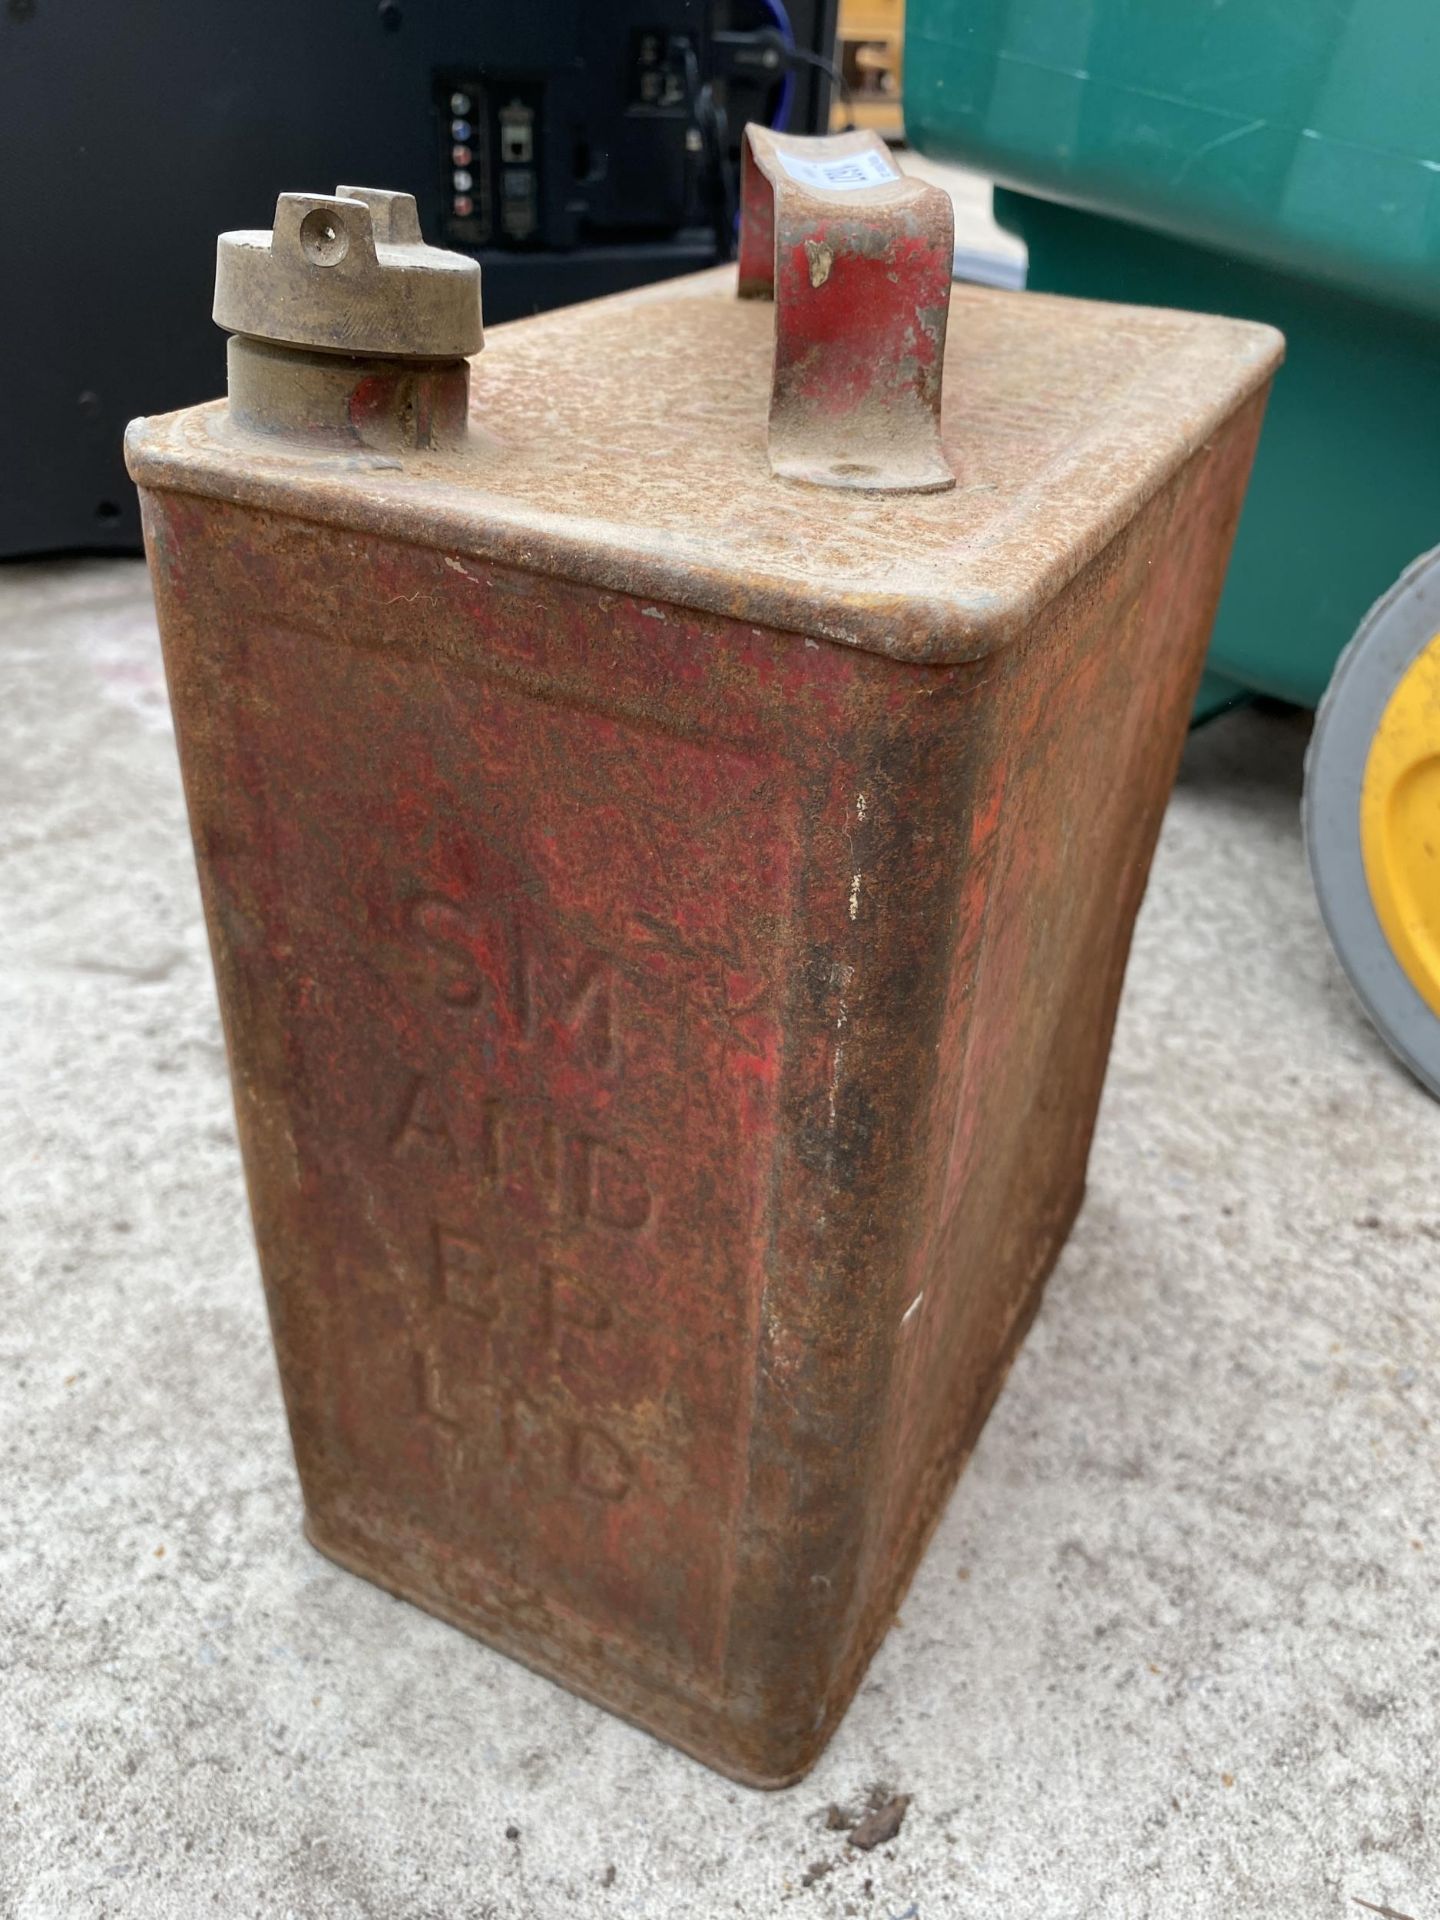 A VINTAGE FUEL CAN WITH BRASS CAP (HAS A HOLE) - Image 2 of 3